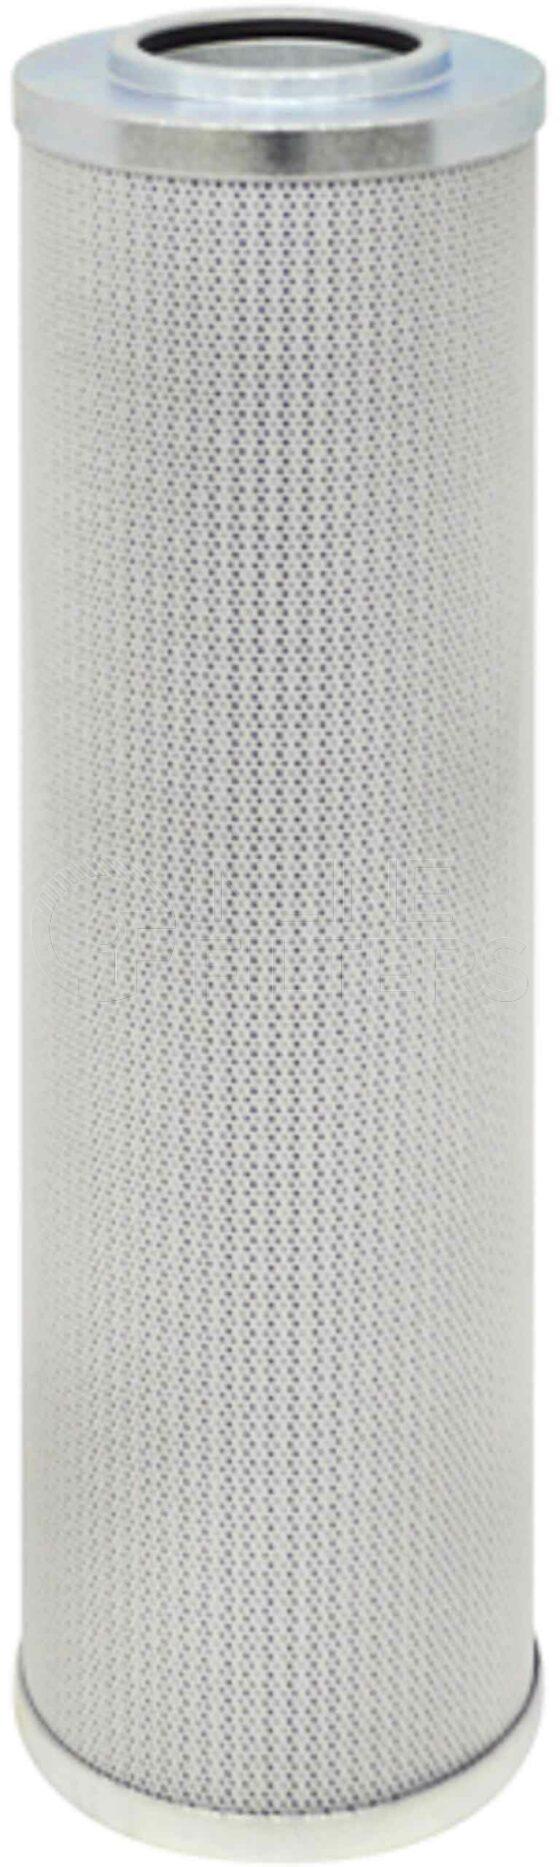 Baldwin PT23276-MPG. Baldwin – Hydraulic Filter Elements – PT23276-MPG OBSOLETE OBSOLETE. Availability Limited to Dealer Stock. Compatible Competitor Part Number Pall HC2237FDT13H Application Pall Applications Length 12 15/16 (328.6) Outside Diameter 3 9/16 (90.5) Product Type Maximum Performance Glass Hydraulic Element Inside Diameter 1 9/16 (39.7) One End Brand Baldwin Division Engine Mobile Aftermarket Industry Marine Mining […]